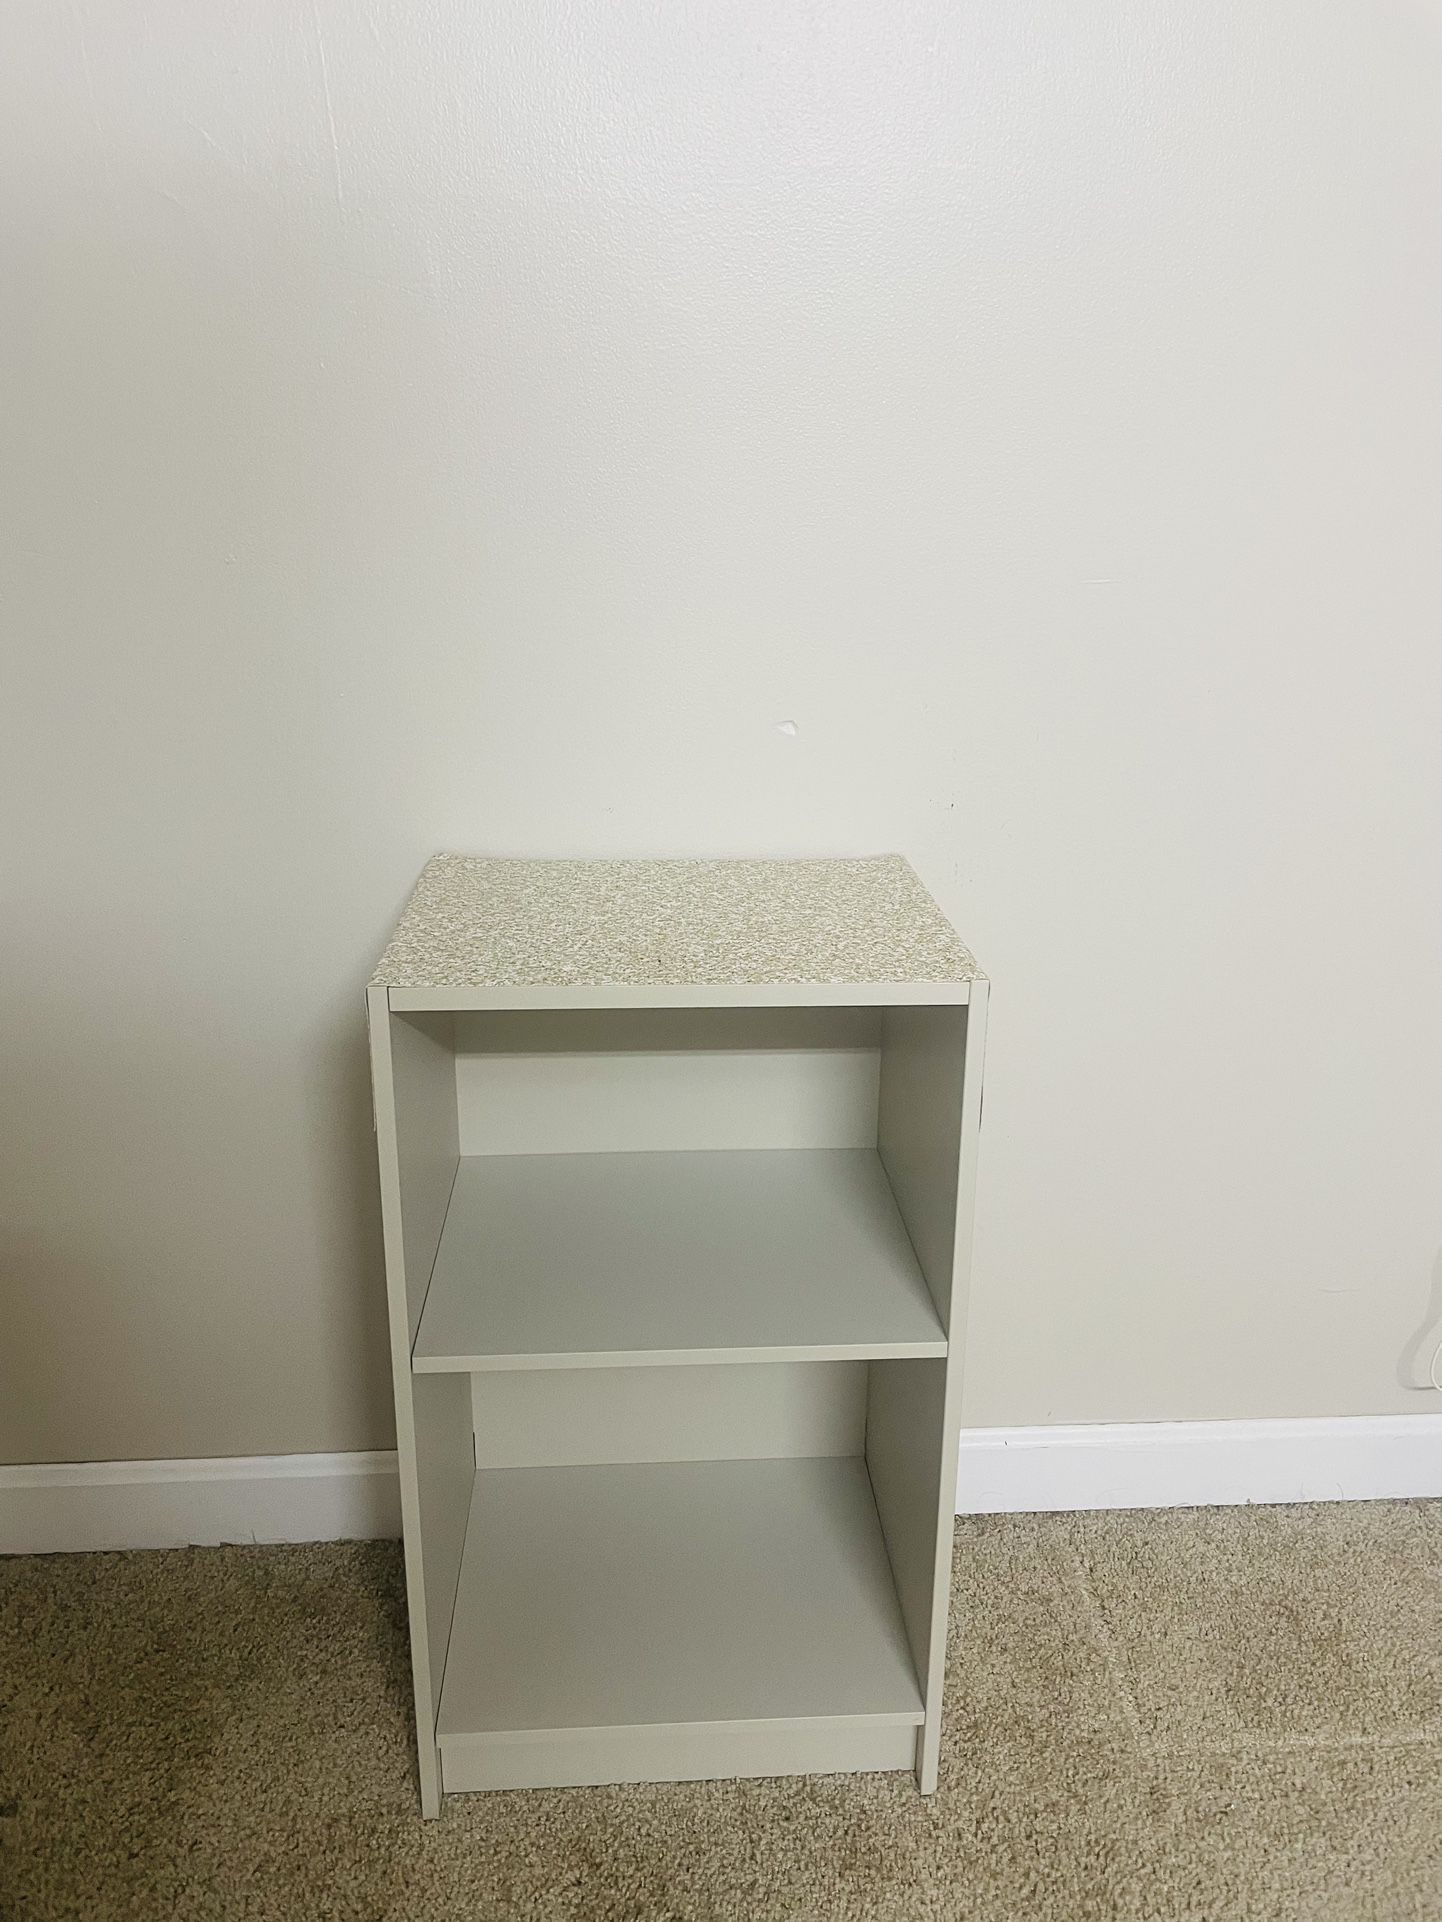 IKEA Wooden Bed Side Table Like A NEW